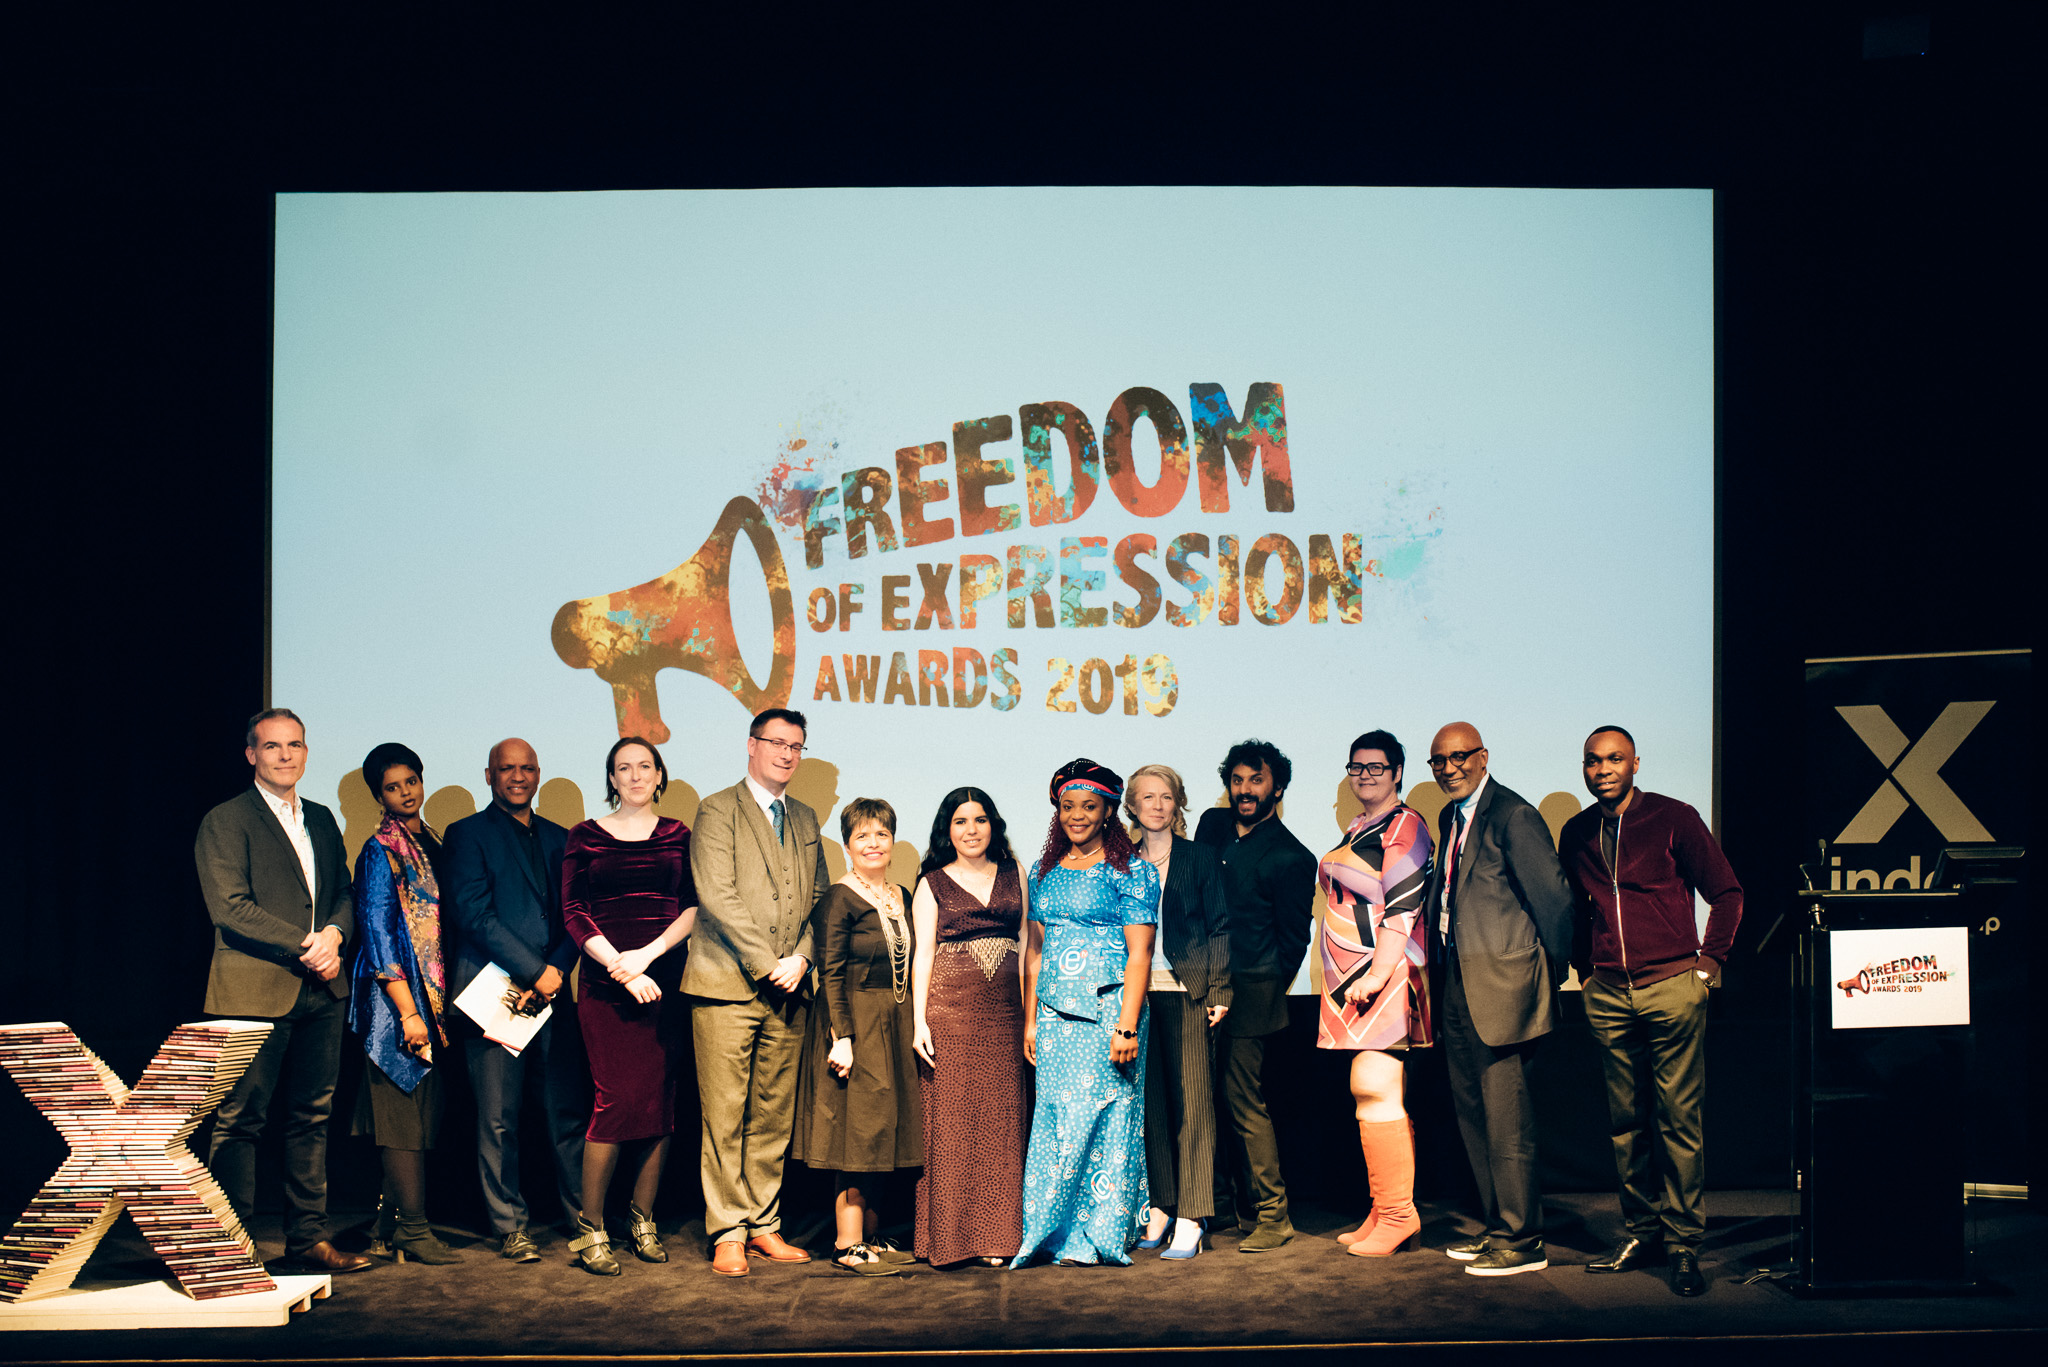 Presenters and award winners at the 2019 Freedom of Expression Awards (from left): Ziyad Marar, president of global publishing, Sage Publishing; Momtaza Mehri, Young People’s Laureate for London; Mark Sealy, Director of Autograph Gallery; Kate Devlin, writer and academic; Terry Anderson, deputy executive director of campaigning award-winning Cartoonist Rights Network International; Carolina Botero Cabrera, executive director of digital activism award-winning Fundación Karisma; Arts award-winning artist Zehra Doğan; Journalism award-winning journalist Mimi Mefo; CEO of Index on Censorship Jodie Ginsberg; Host the awards, comedian Nish Kumar; Christel Dahlskjaer, Director of Outreach at Private Internet Access; Chair of Index on Censorship Trevor Phillips; Otis Tabasenge of the band Kasai Masai. (Photo: Elina Kansikas for Index on Censorship)